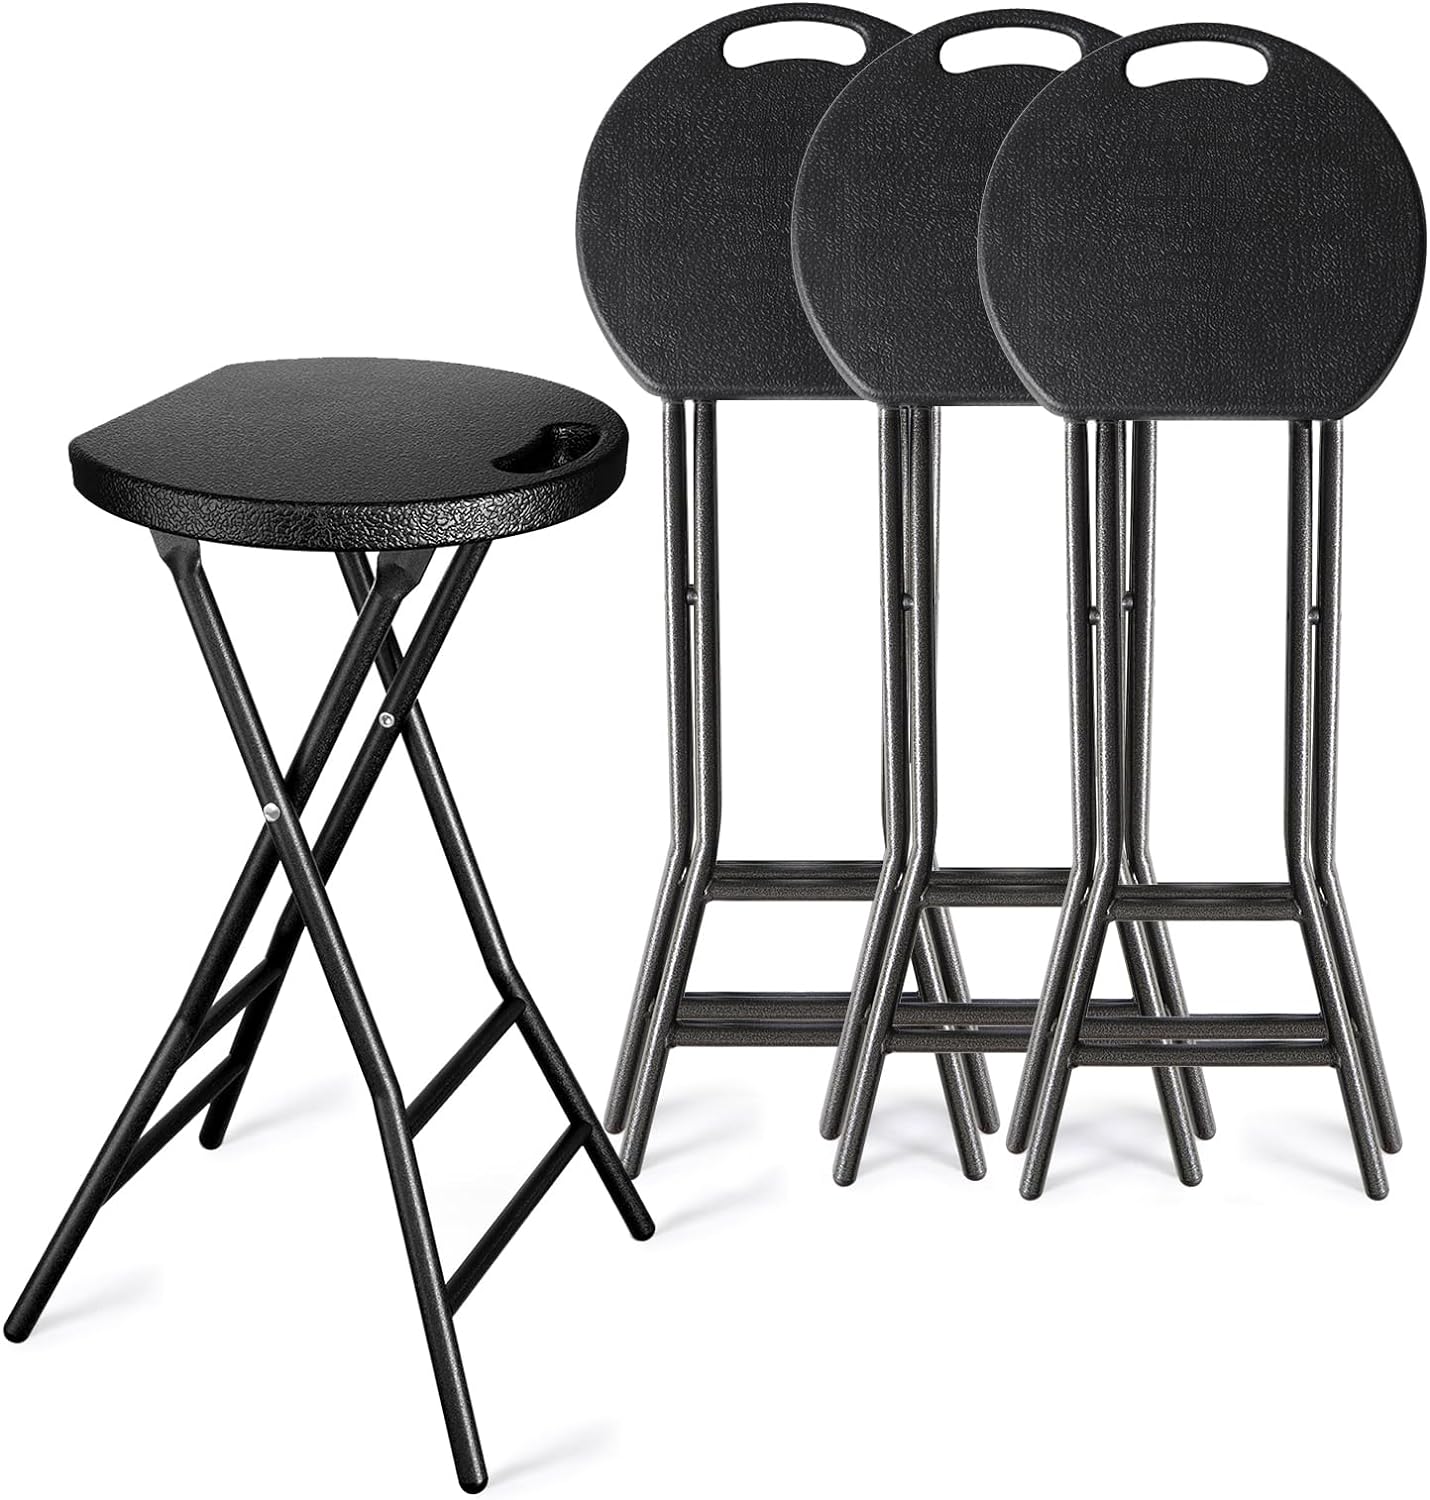 YOMT Folding Stool, 24 Inch Foldable Stool for Adults, Portable Counter Height Bar Stools Indoor Outdoor Use for Kitchen Dorm Camping Fishing Travel, 300lbs Capacity, Black Stool Set of 4